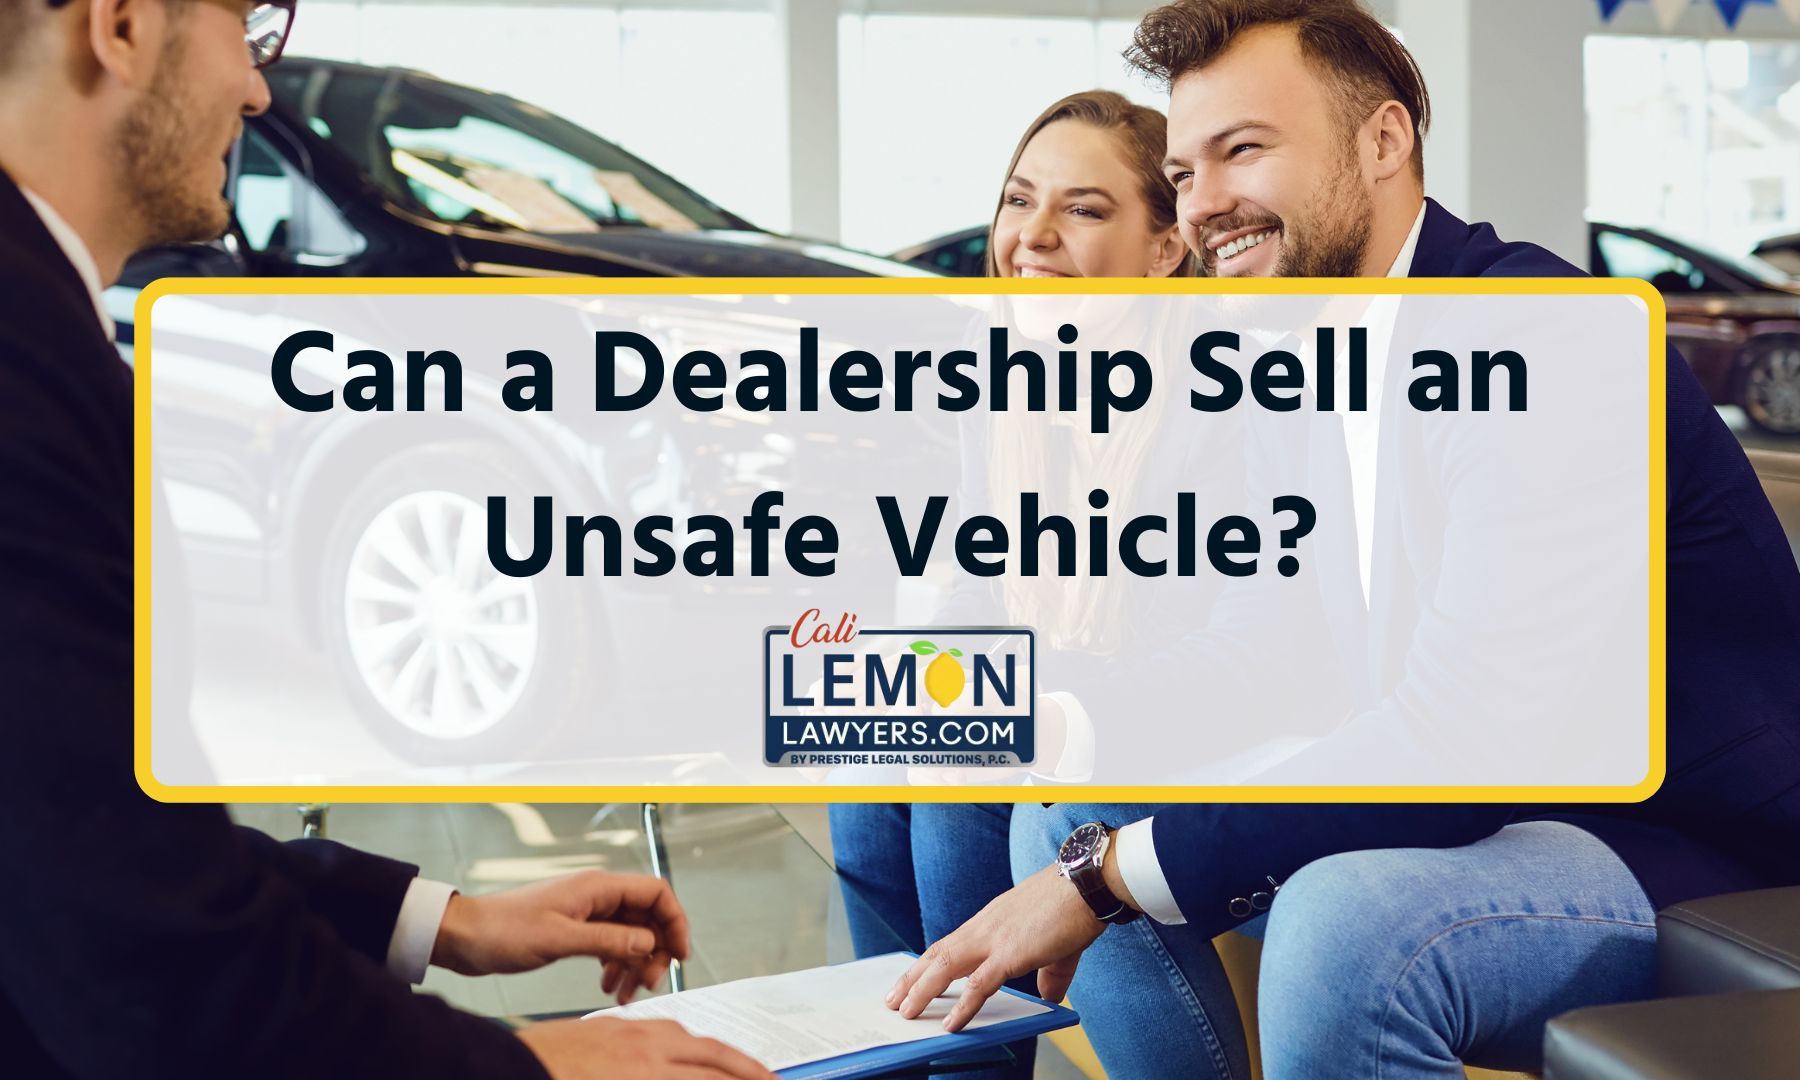 Can a Dealership Sell an Unsafe Vehicle?